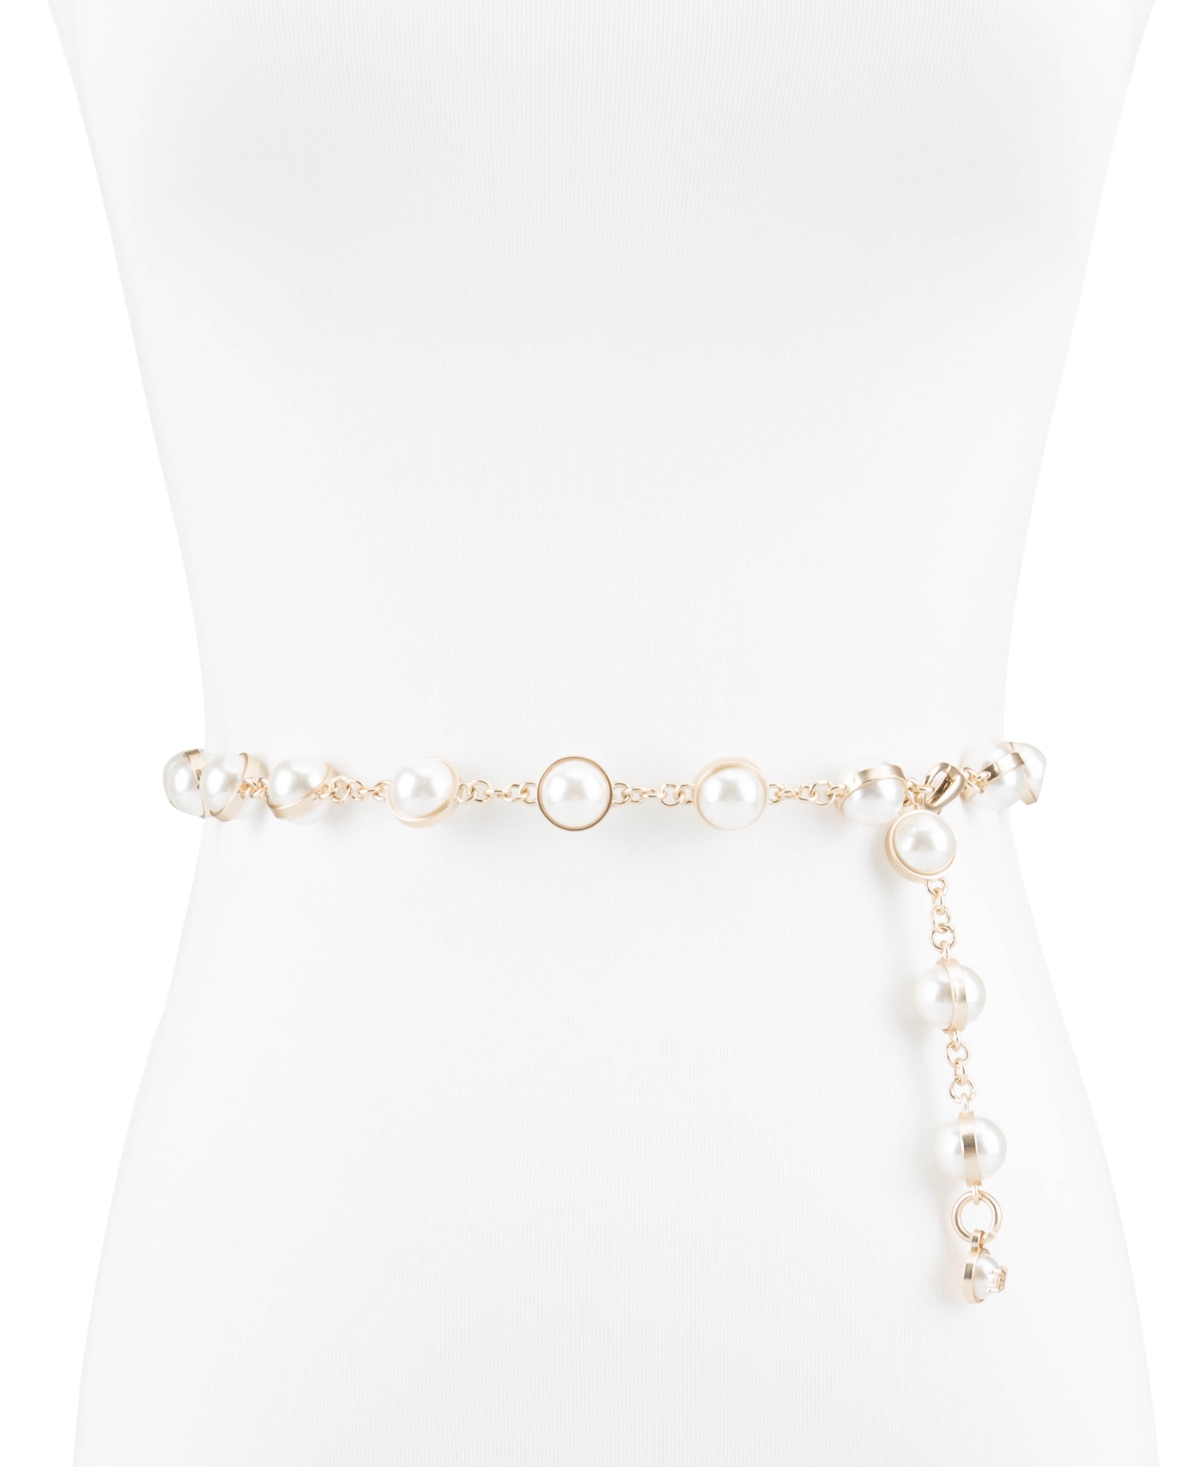 Women's Imitated Pearl Embellished Gold-Tone Chain Dress Belt - Gold, White